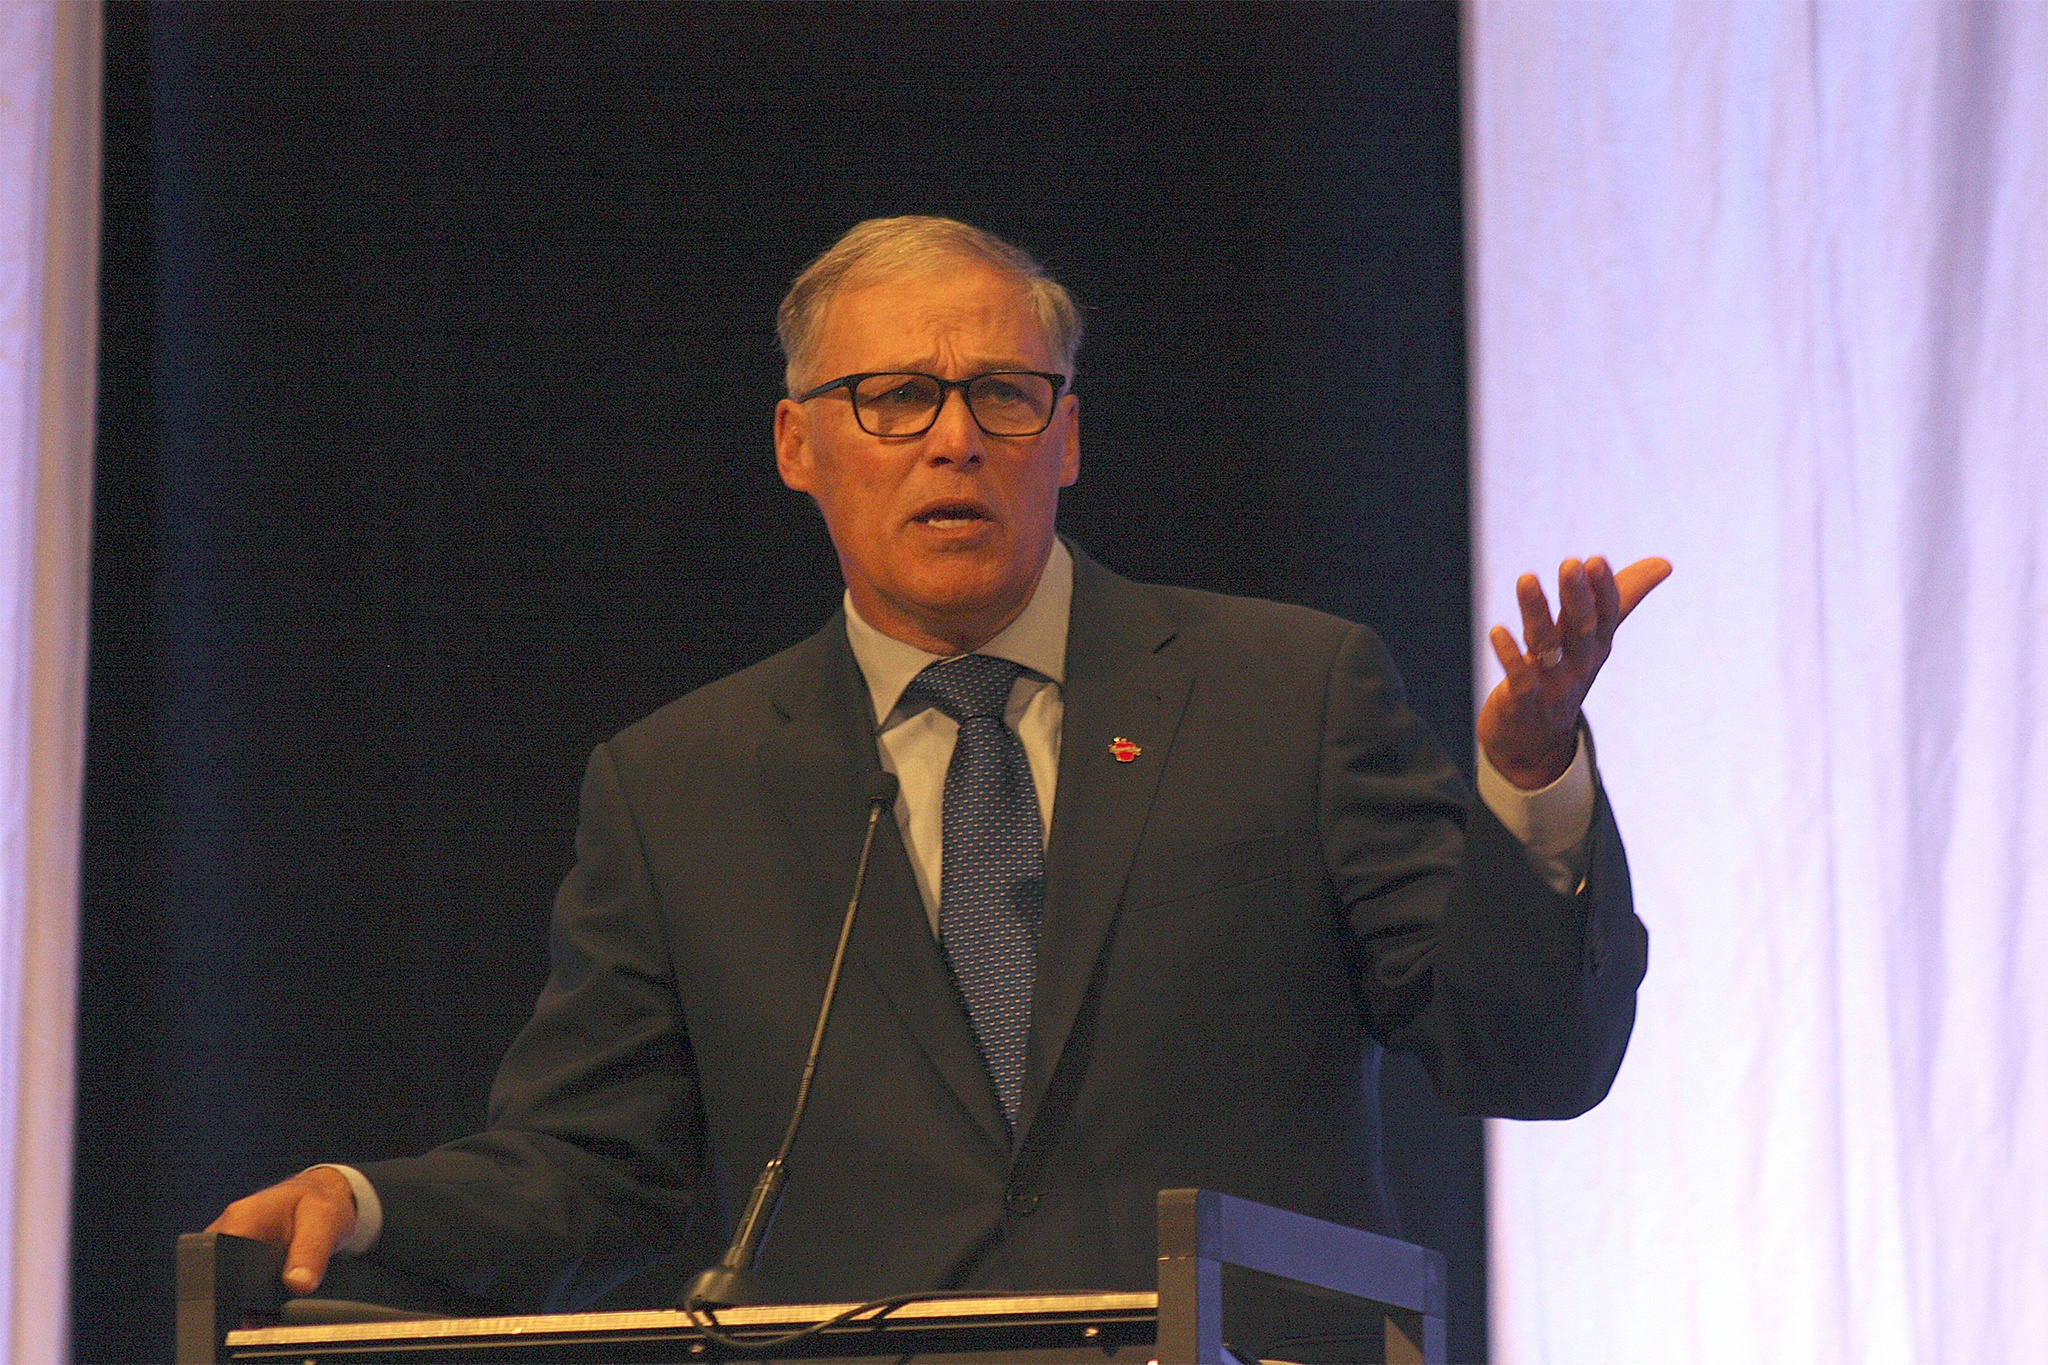 Washington Gov. Jay Inslee speaks about the need to build more homes in the state. Ryan Murray/staff photo